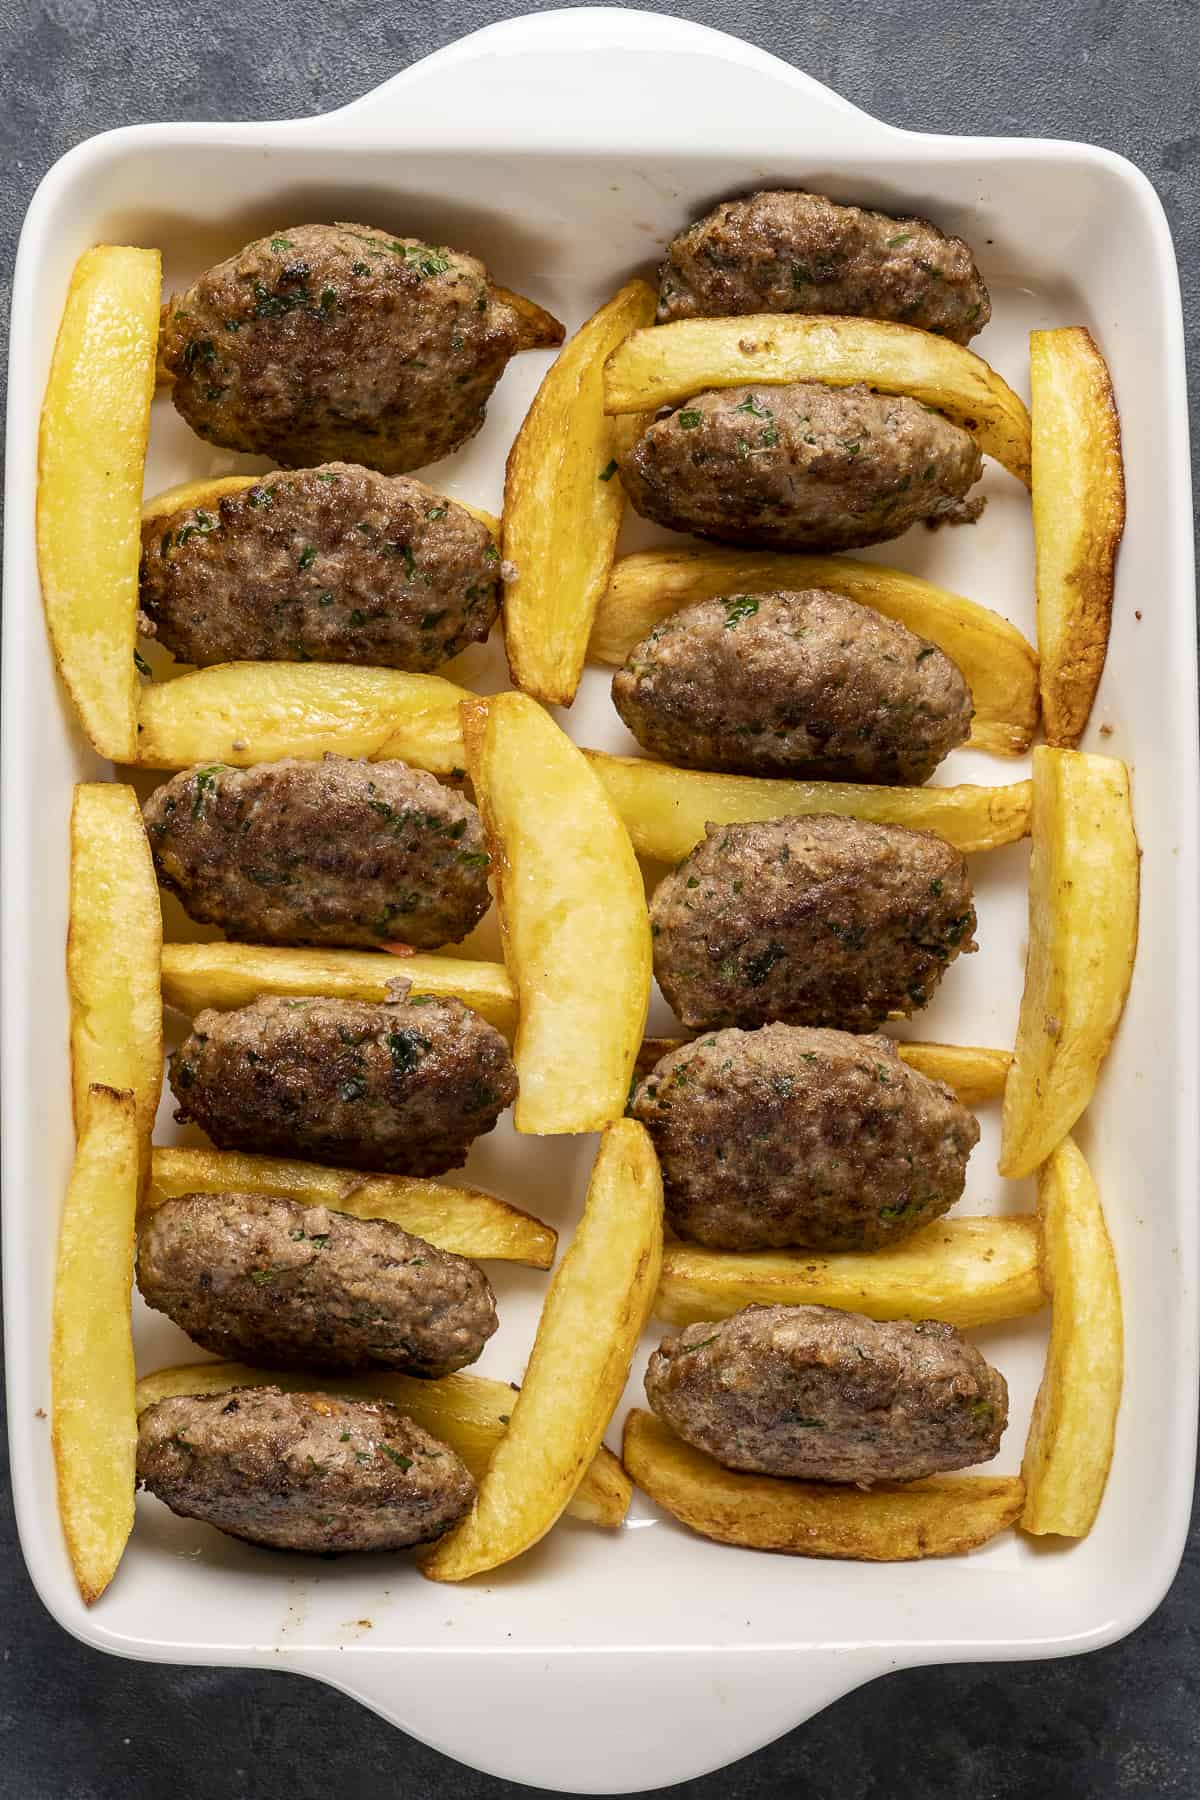 Fried potatoes and meatballs in a white baking pan.